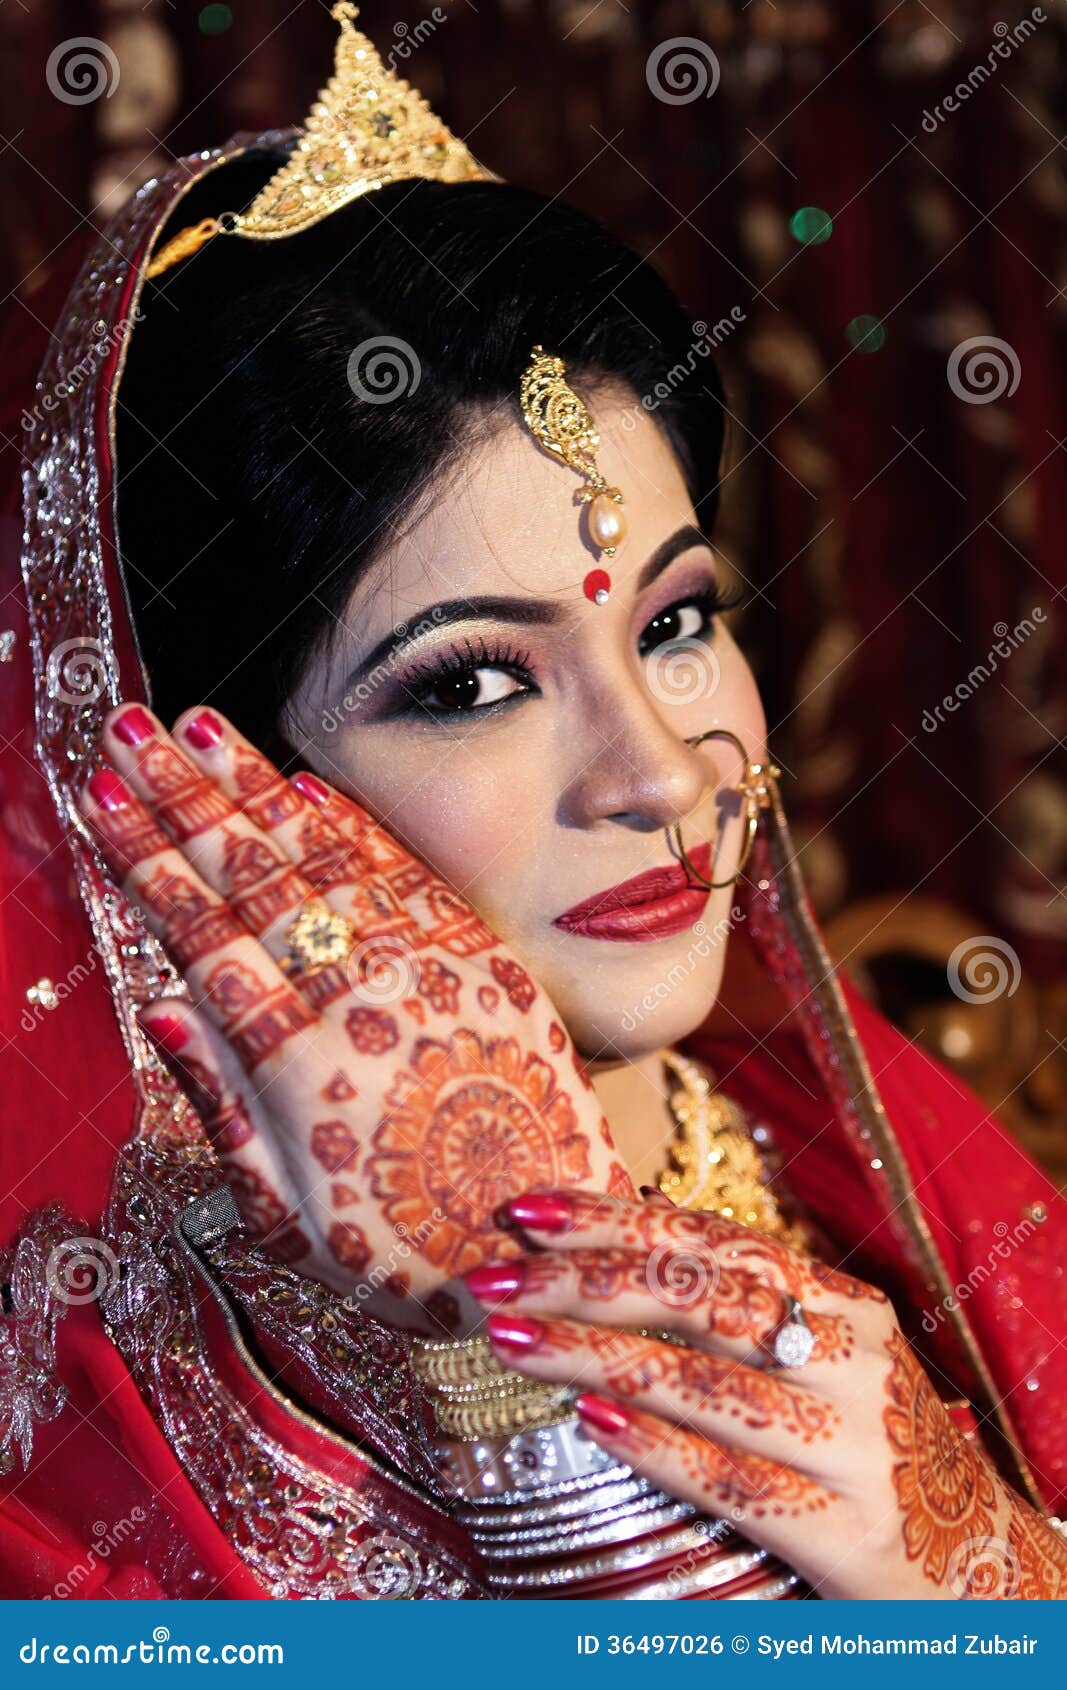 57800 Indian Wedding Ceremony Stock Photos Pictures  RoyaltyFree Images   iStock  Indian culture Wedding reception Visakhapatnam